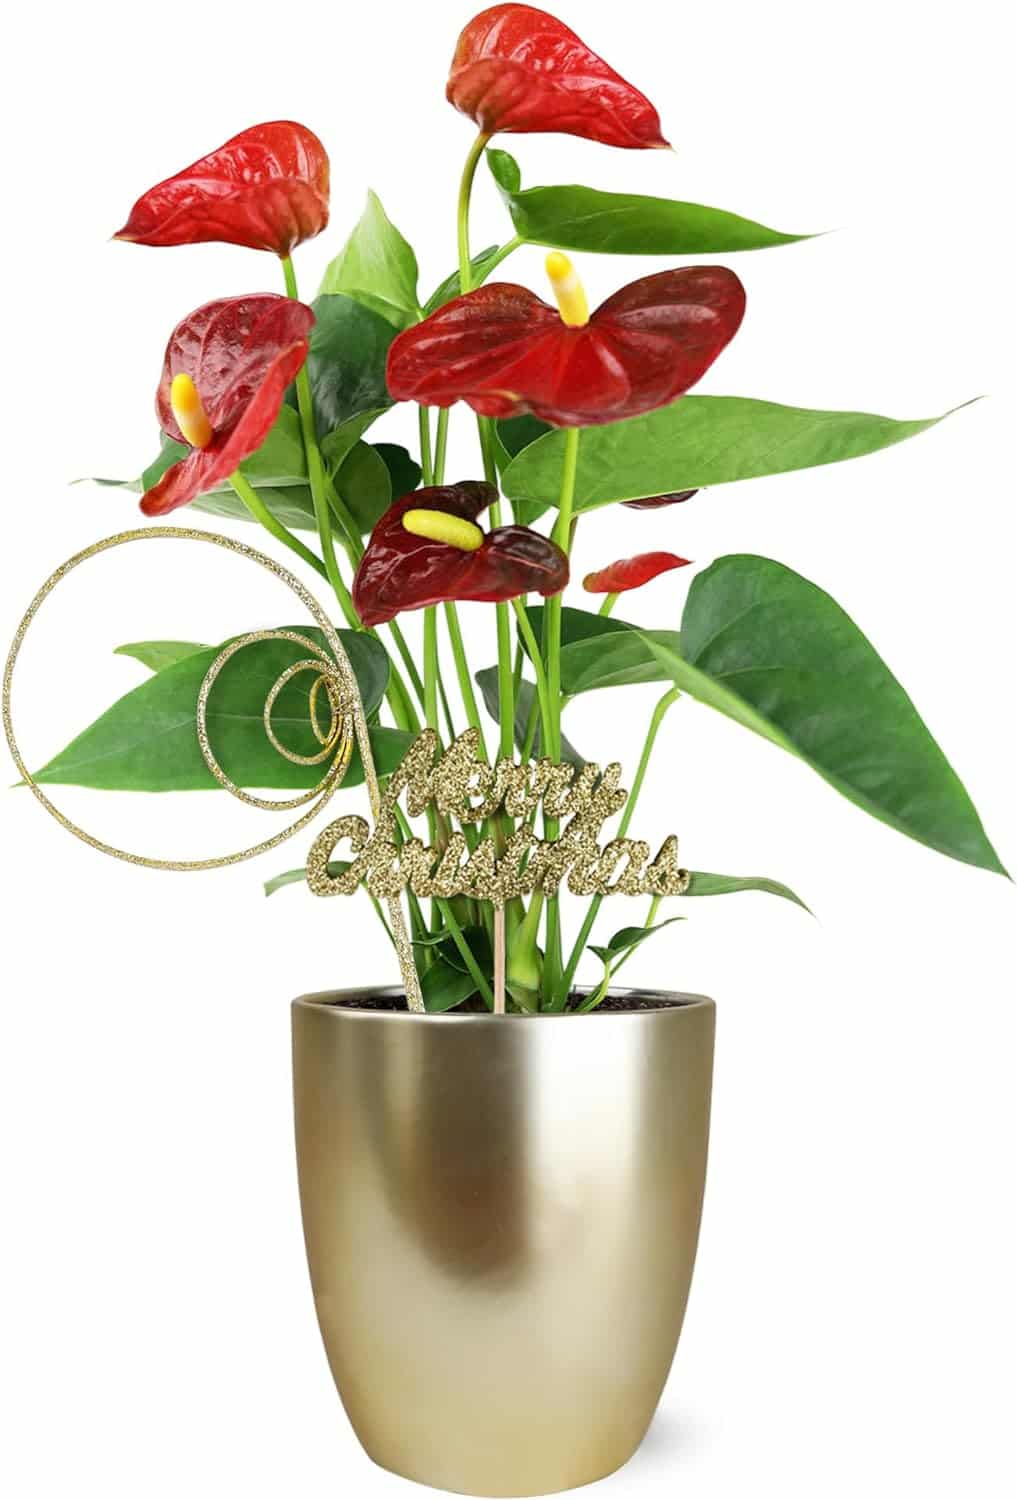 Just Add Ice SA5150 Live Red Anthurium in Gold Ceramic with Merry Christmas Pick, Indoor Plant, Long-Lasting Flowers, Holiday Décor or Gift, 5 Diameter, 14-18 Tall